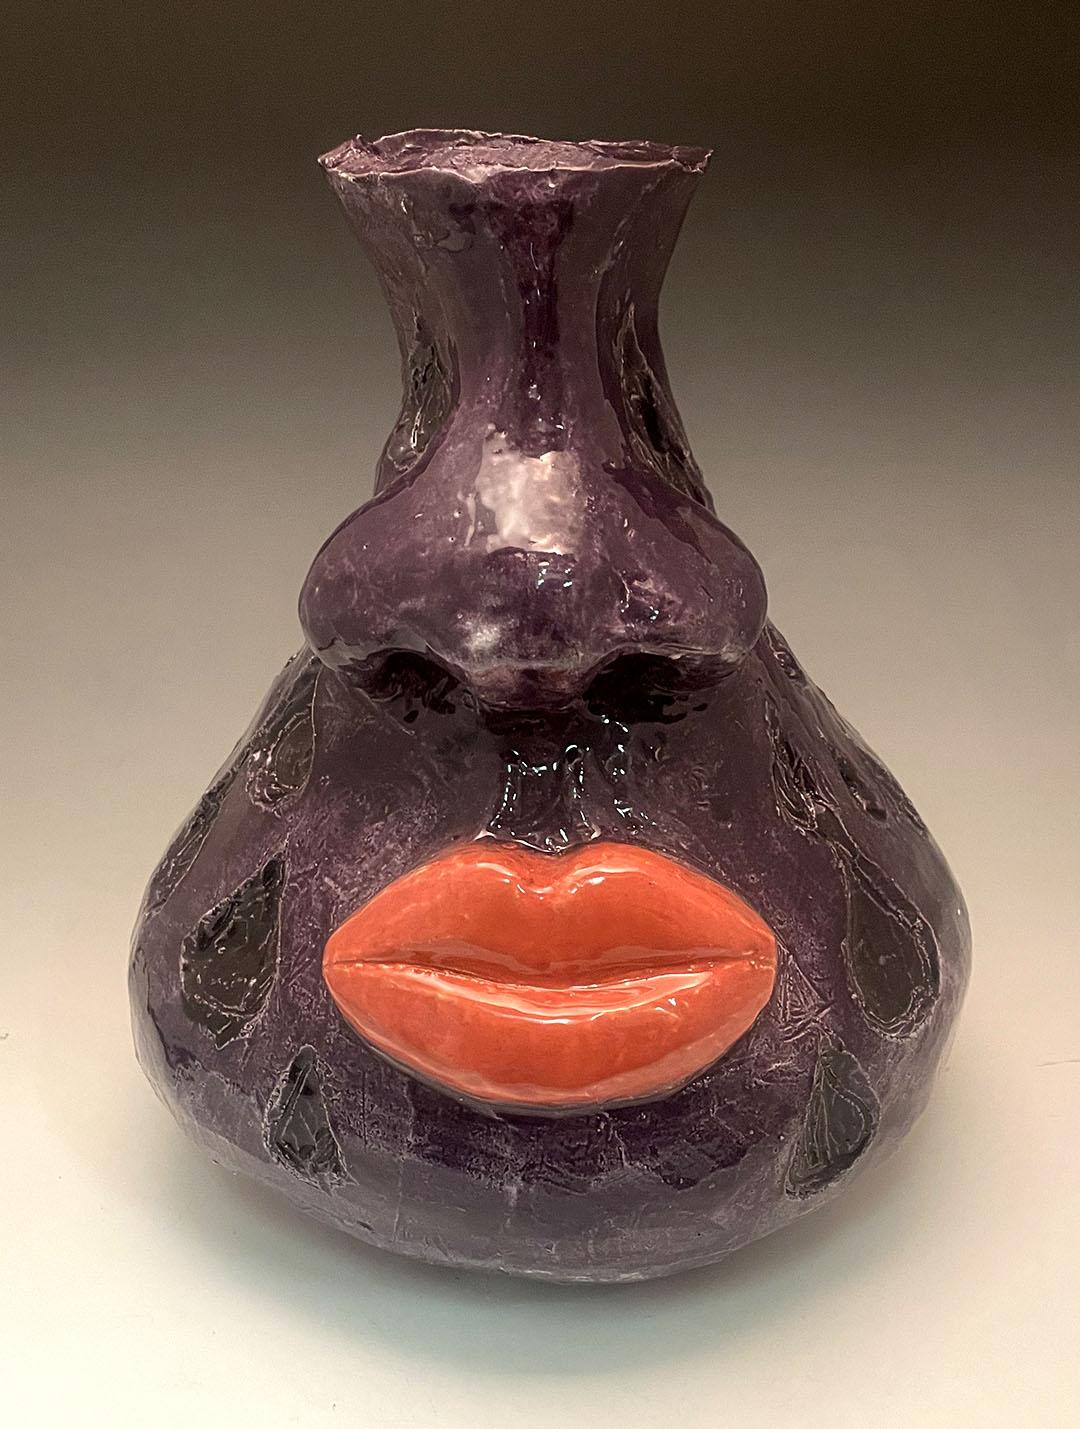 Vase with nose and lips